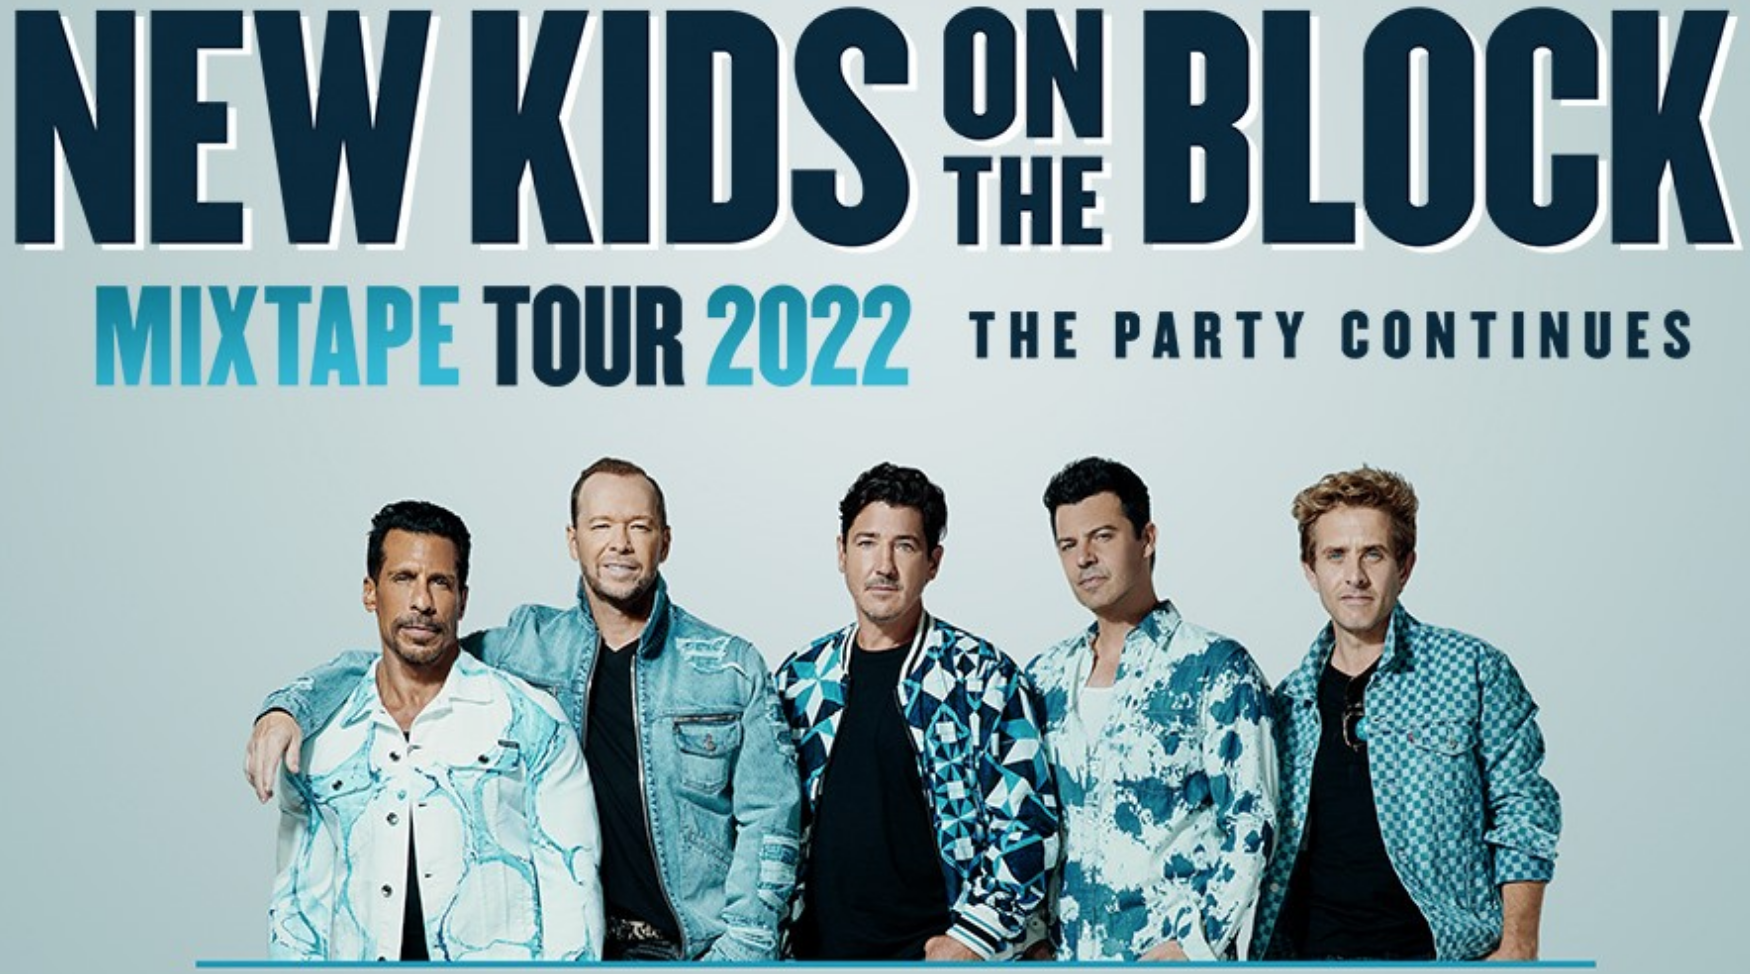 New Kids on the Block - The Mixtape tour poster